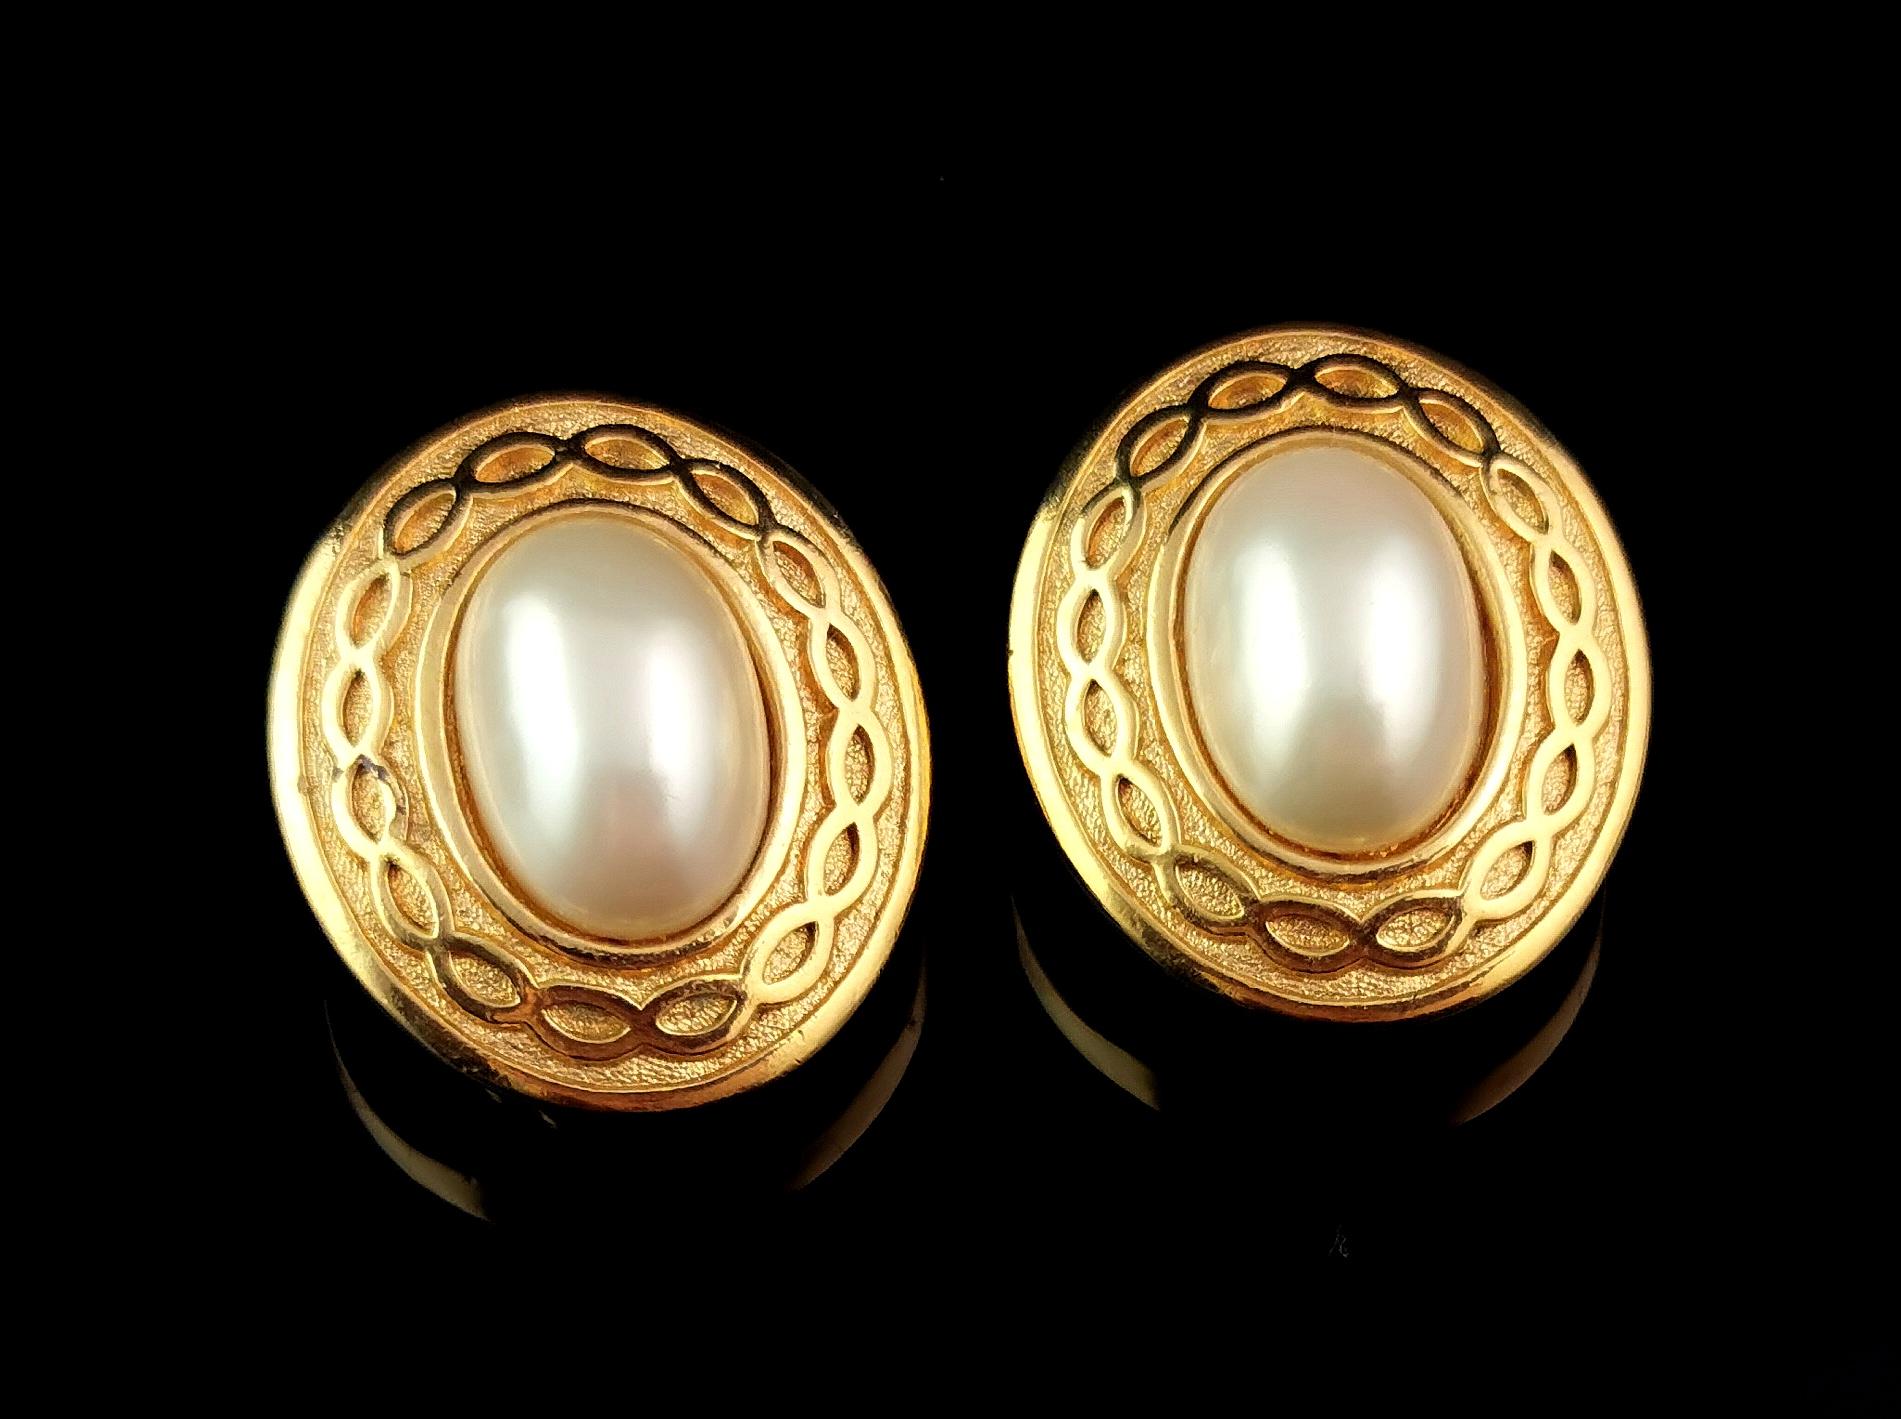 A fantastic pair of vintage Burberry faux pearl clip on earrings.

A medium sized pair of earrings in gold tone, lightly textured metal with a decorative chain link style border.

Each earring is set with a large creamy lustrous faux pearl